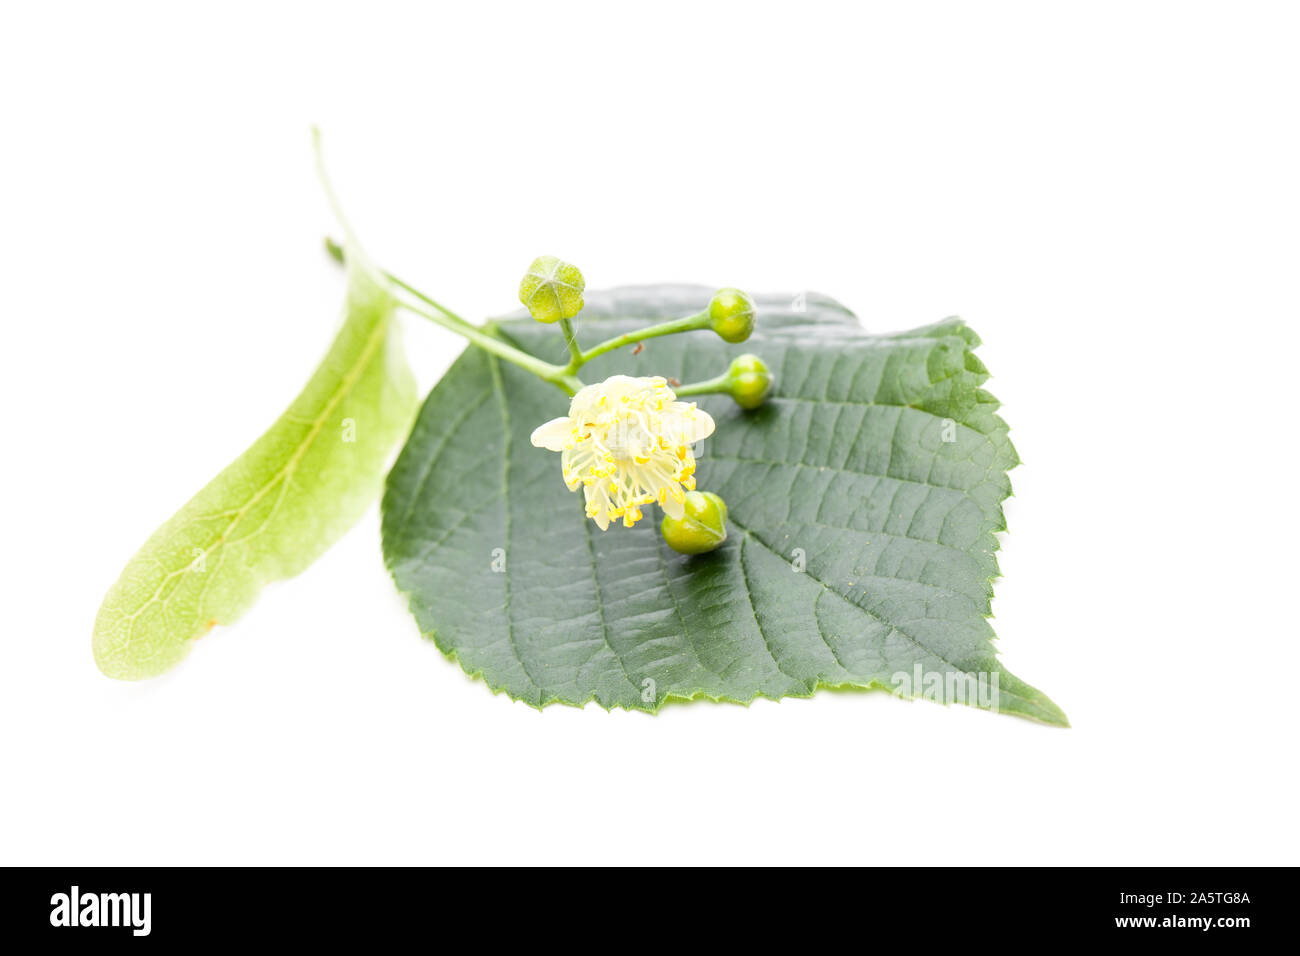 Lime (Tilia grandifolia) flower and leaf on a white background Stock Photo